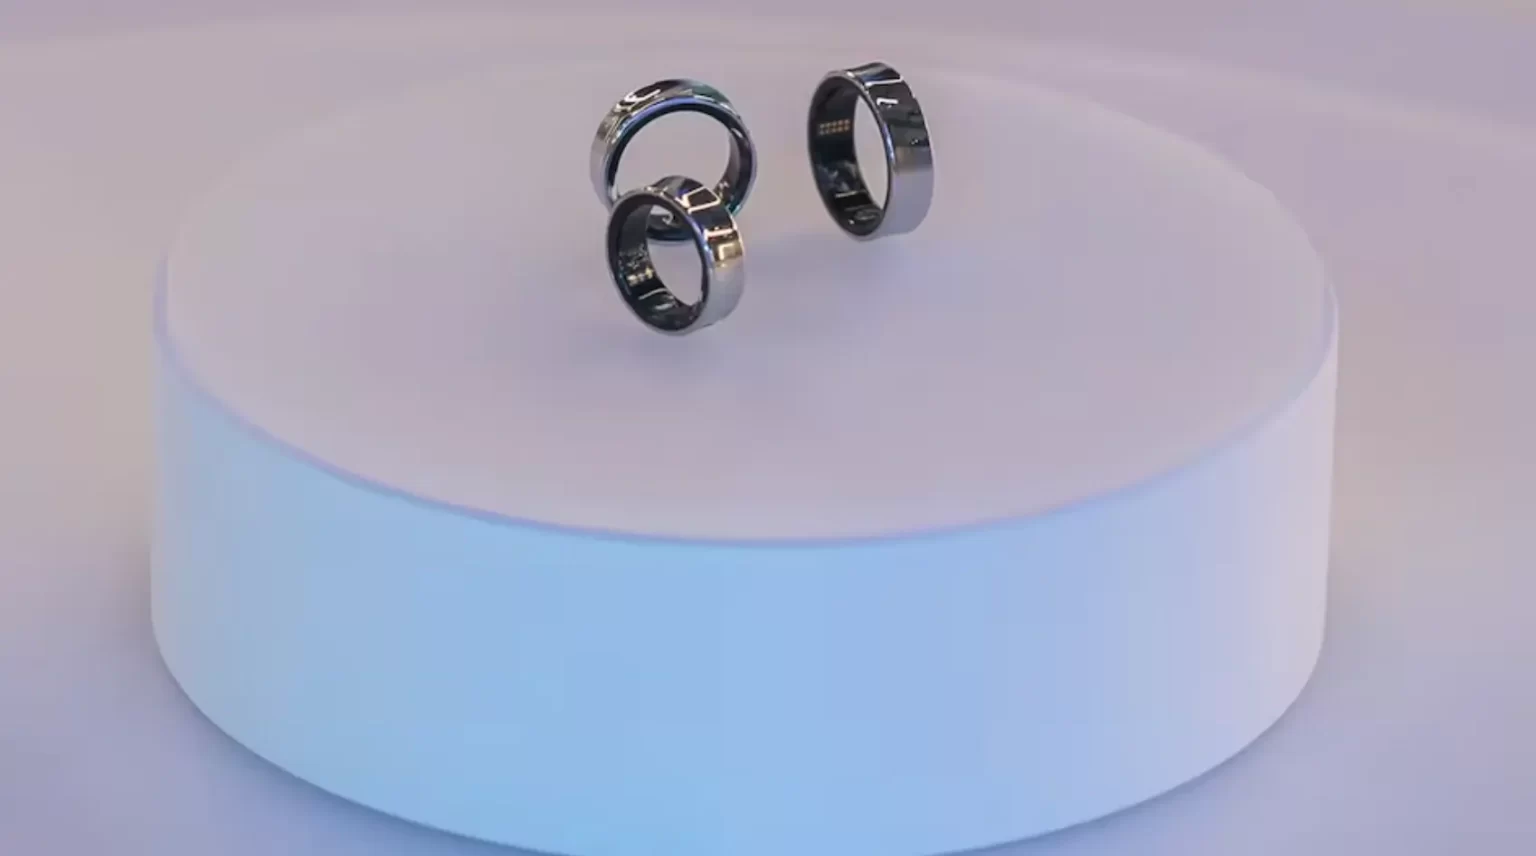 Samsung Galaxy Ring, showcasing its design and features ahead of its release